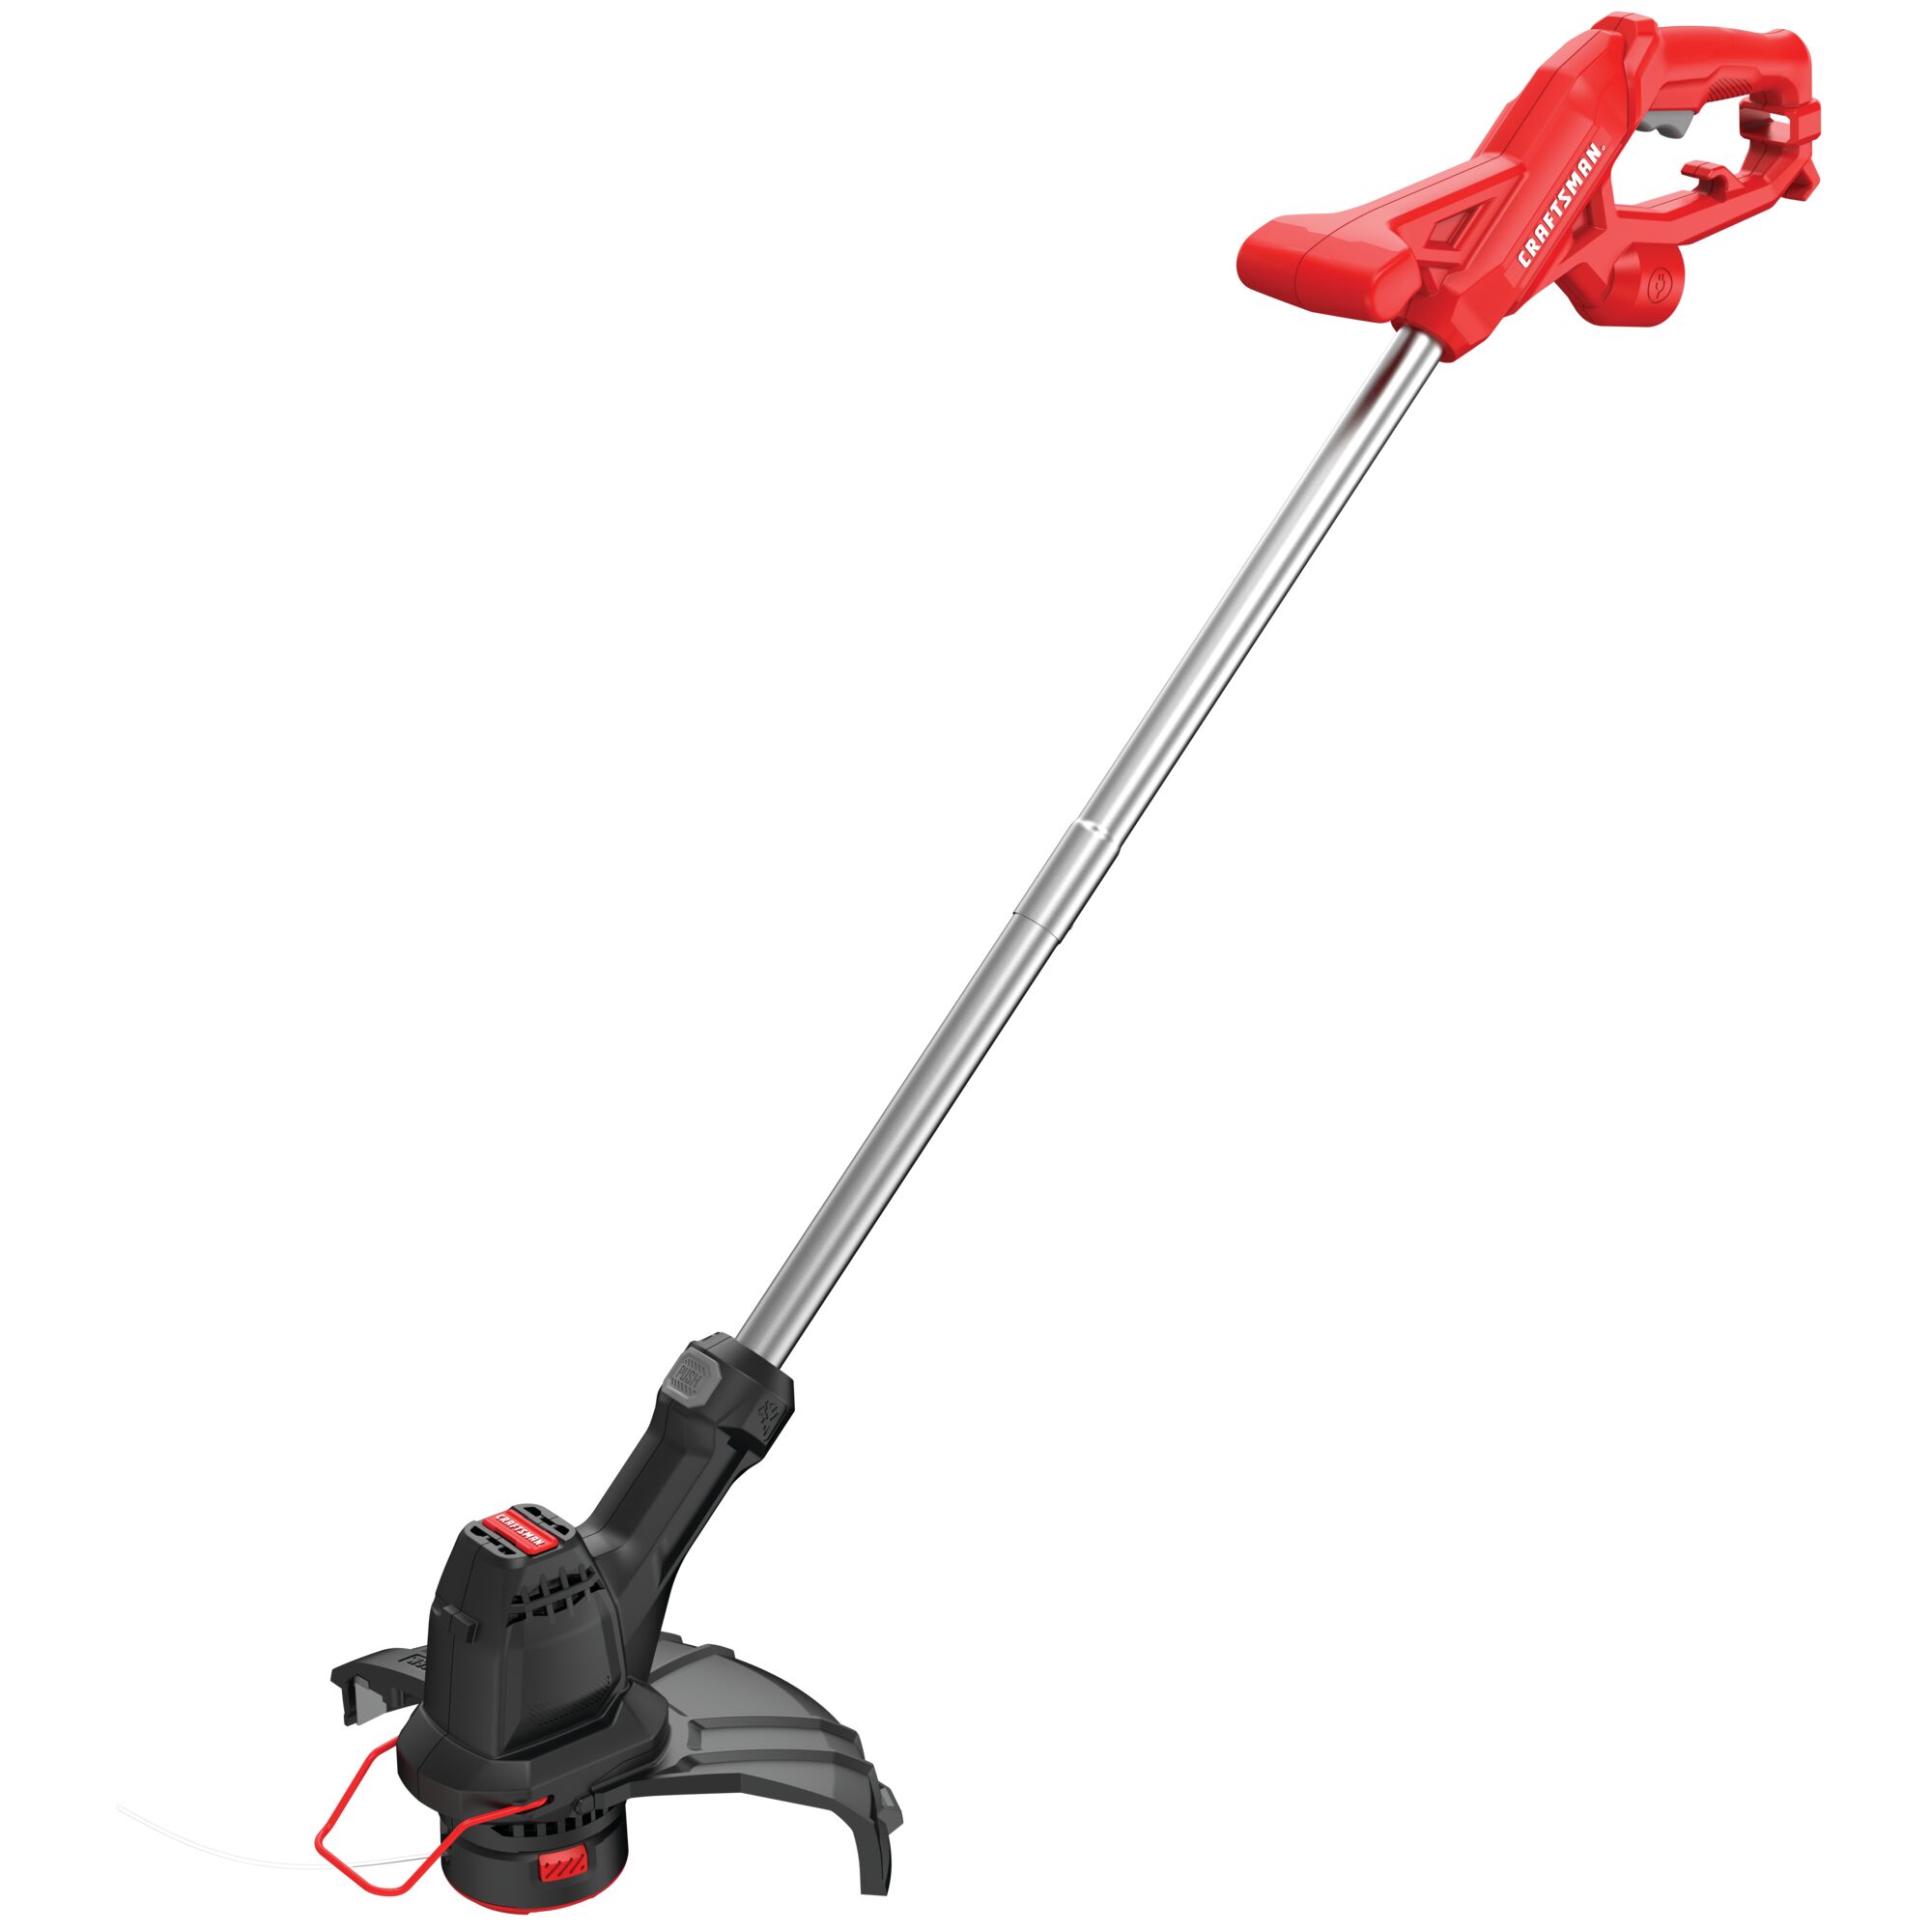 Profile of 3 dot 5 amp 12 inch corded string trimmer cum edger.